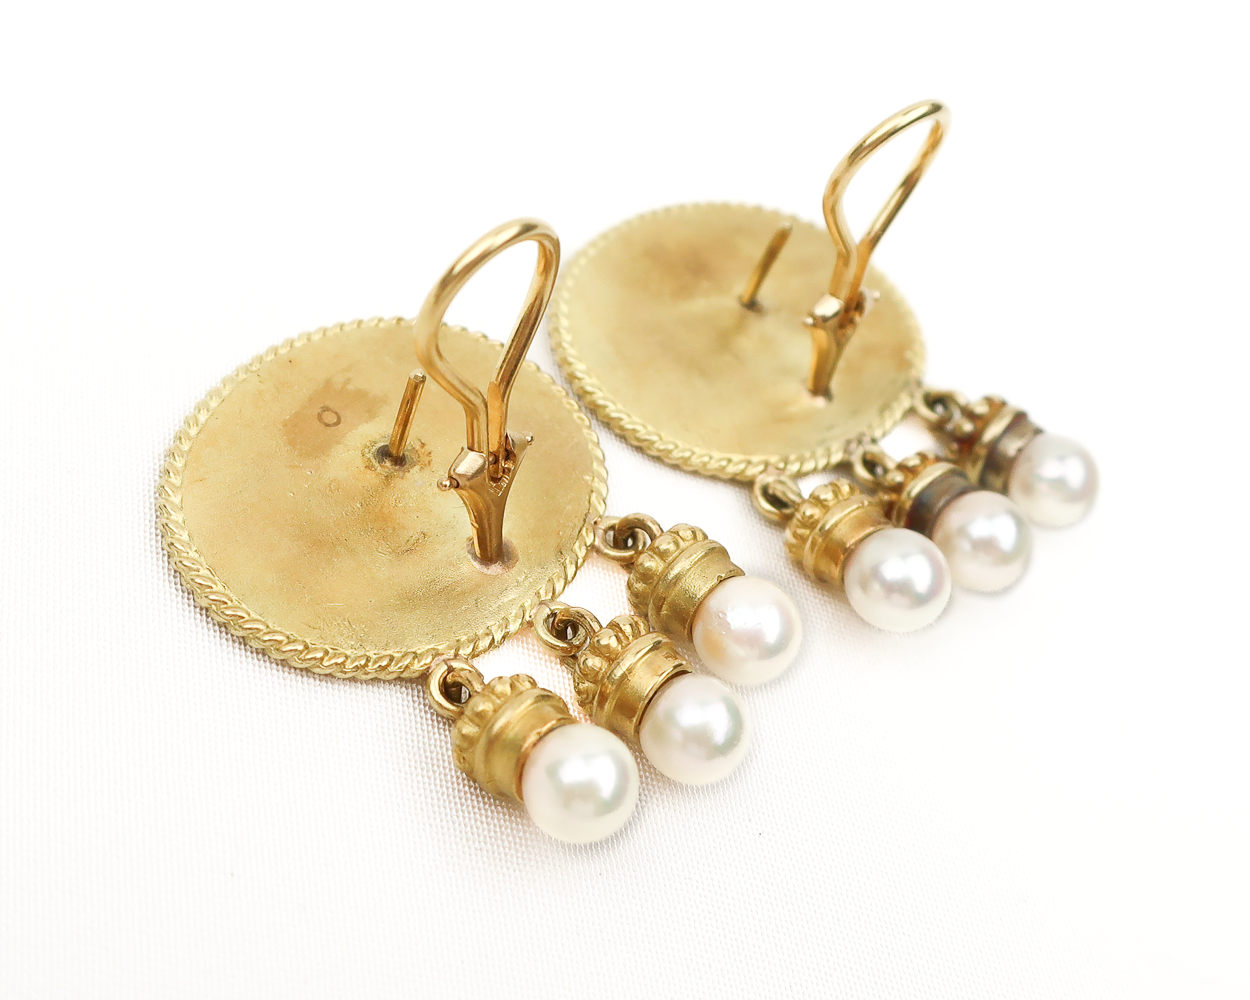 Vintage Italian Gold Earrings with Pearl Drops